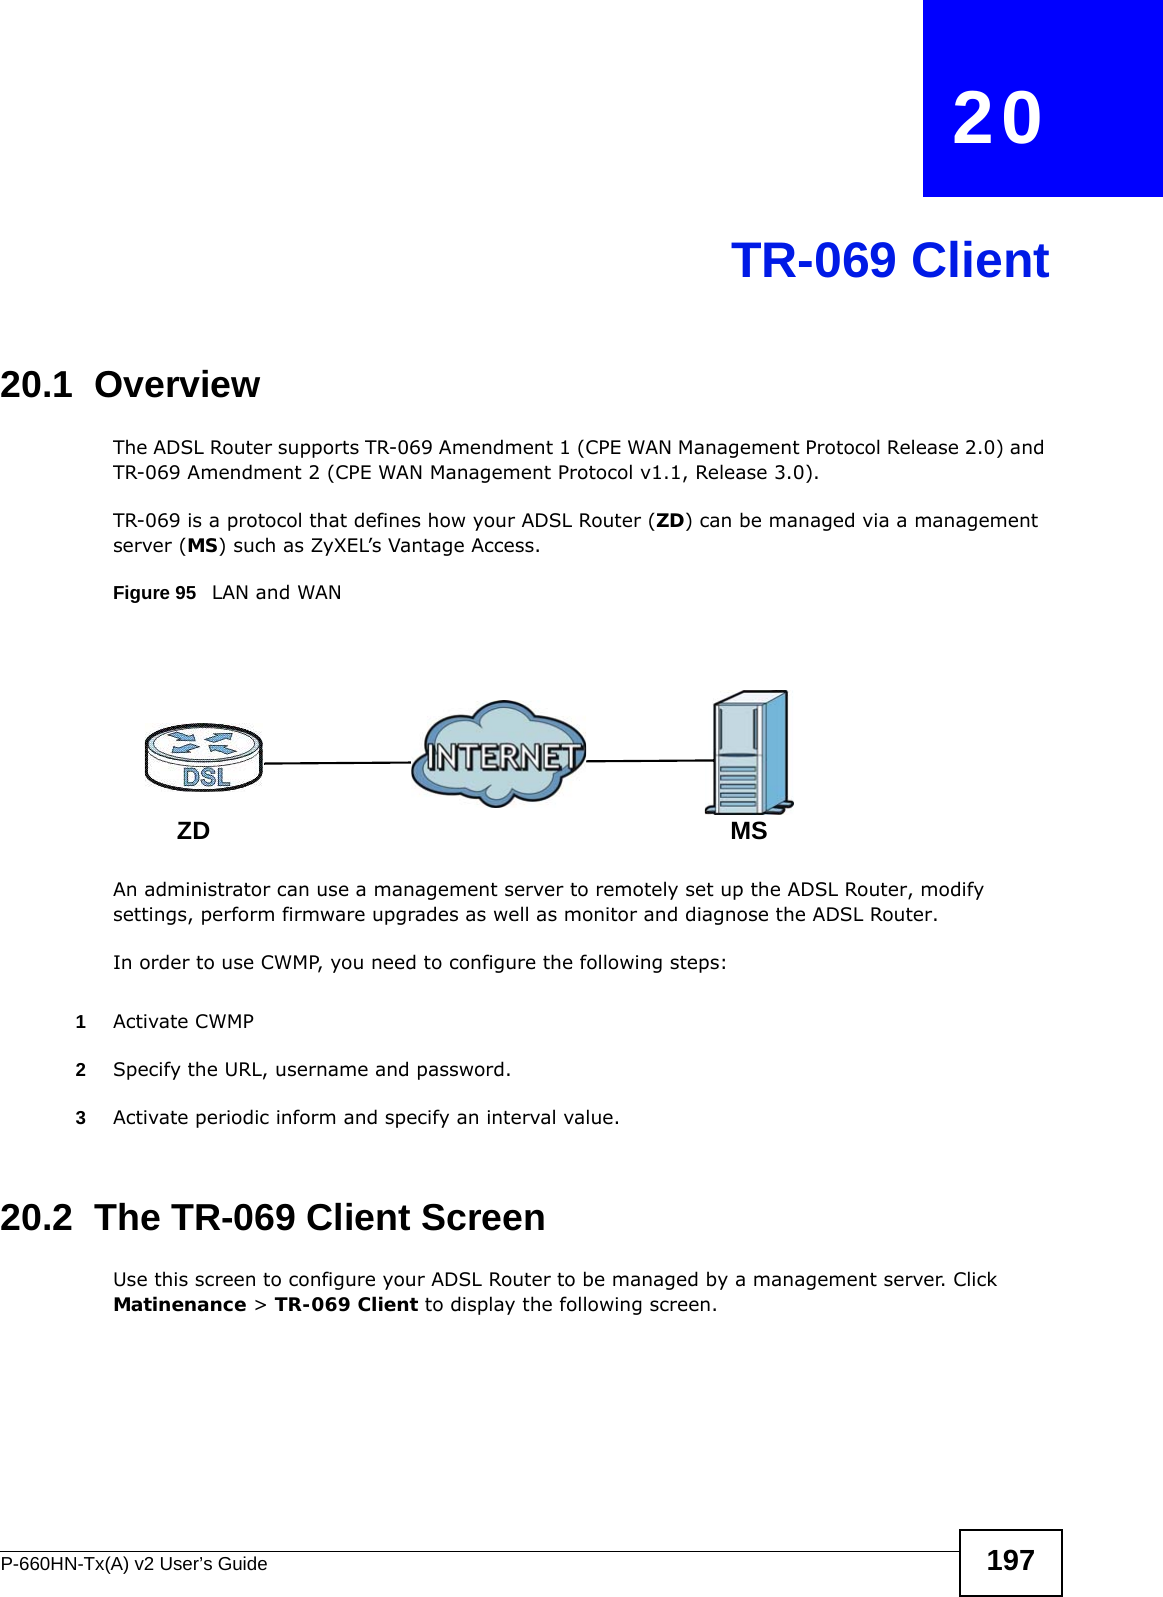 P-660HN-Tx(A) v2 User’s Guide 197CHAPTER   20TR-069 Client20.1  OverviewThe ADSL Router supports TR-069 Amendment 1 (CPE WAN Management Protocol Release 2.0) and TR-069 Amendment 2 (CPE WAN Management Protocol v1.1, Release 3.0).TR-069 is a protocol that defines how your ADSL Router (ZD) can be managed via a management server (MS) such as ZyXEL’s Vantage Access. Figure 95   LAN and WANAn administrator can use a management server to remotely set up the ADSL Router, modify settings, perform firmware upgrades as well as monitor and diagnose the ADSL Router. In order to use CWMP, you need to configure the following steps:1Activate CWMP2Specify the URL, username and password.3Activate periodic inform and specify an interval value.20.2  The TR-069 Client ScreenUse this screen to configure your ADSL Router to be managed by a management server. Click Matinenance &gt; TR-069 Client to display the following screen.MSZD